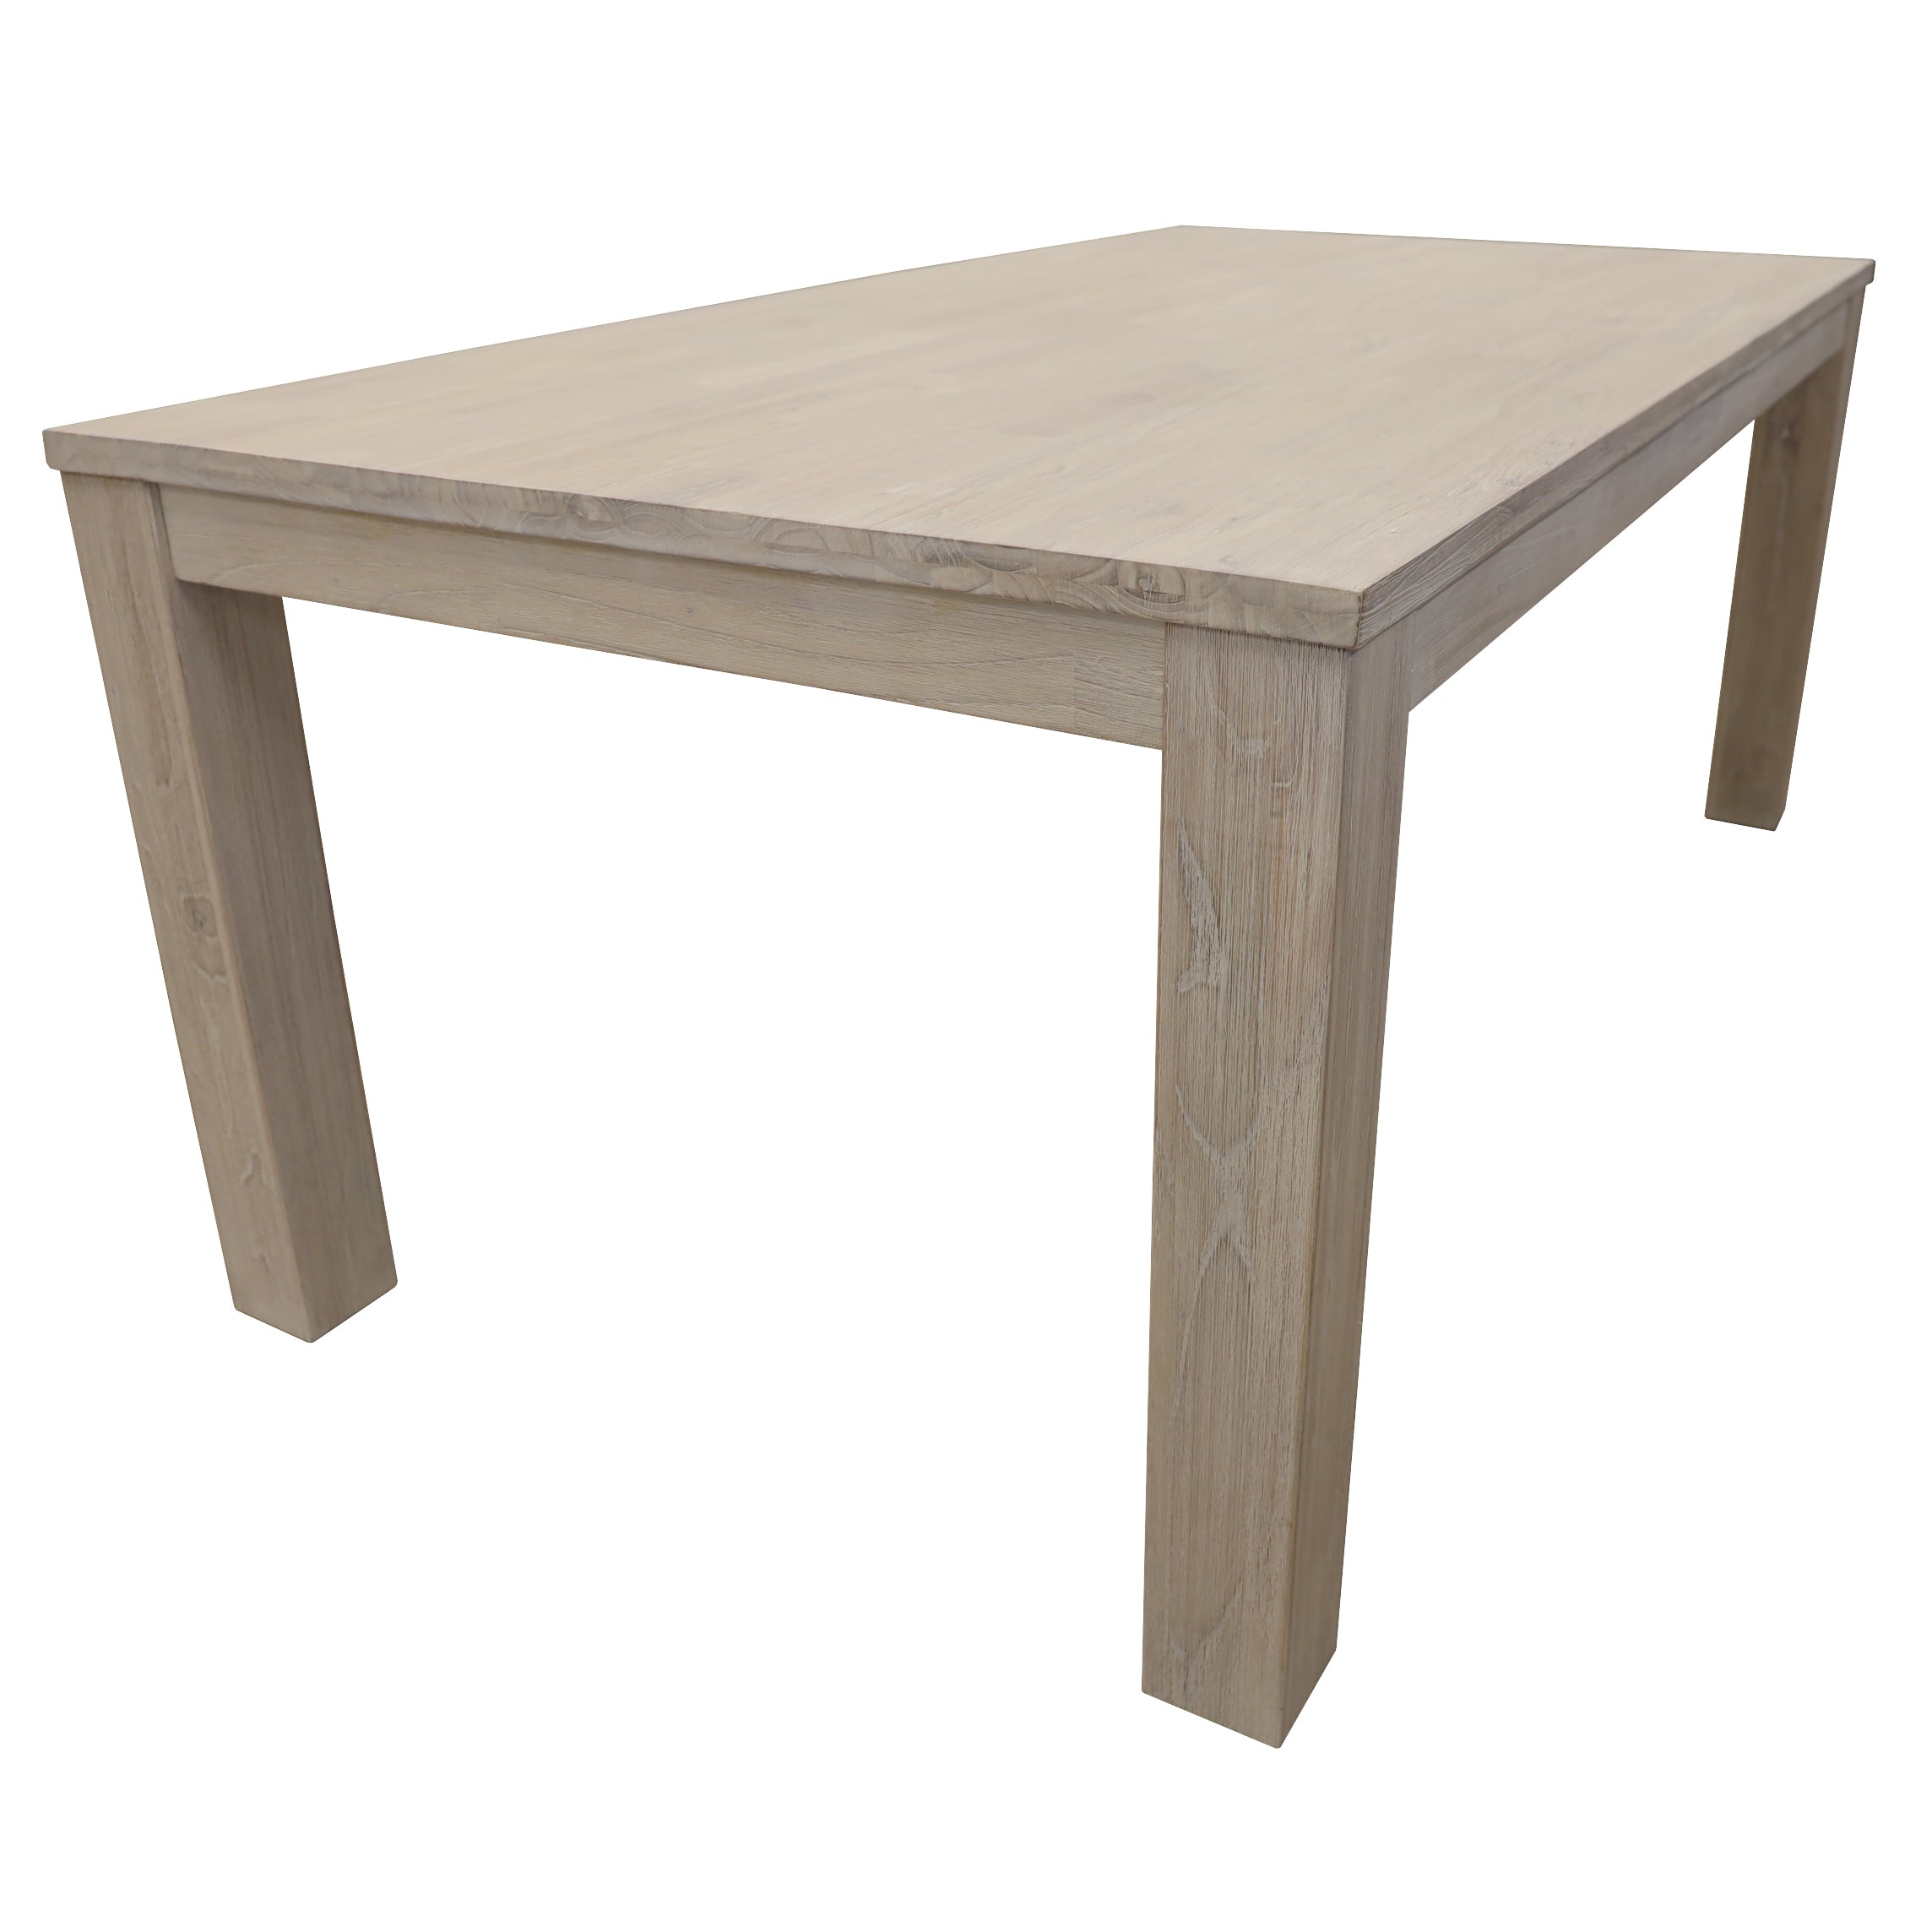 foxglove-dining-table-190cm-solid-mt-ash-wood-home-dinner-furniture-white